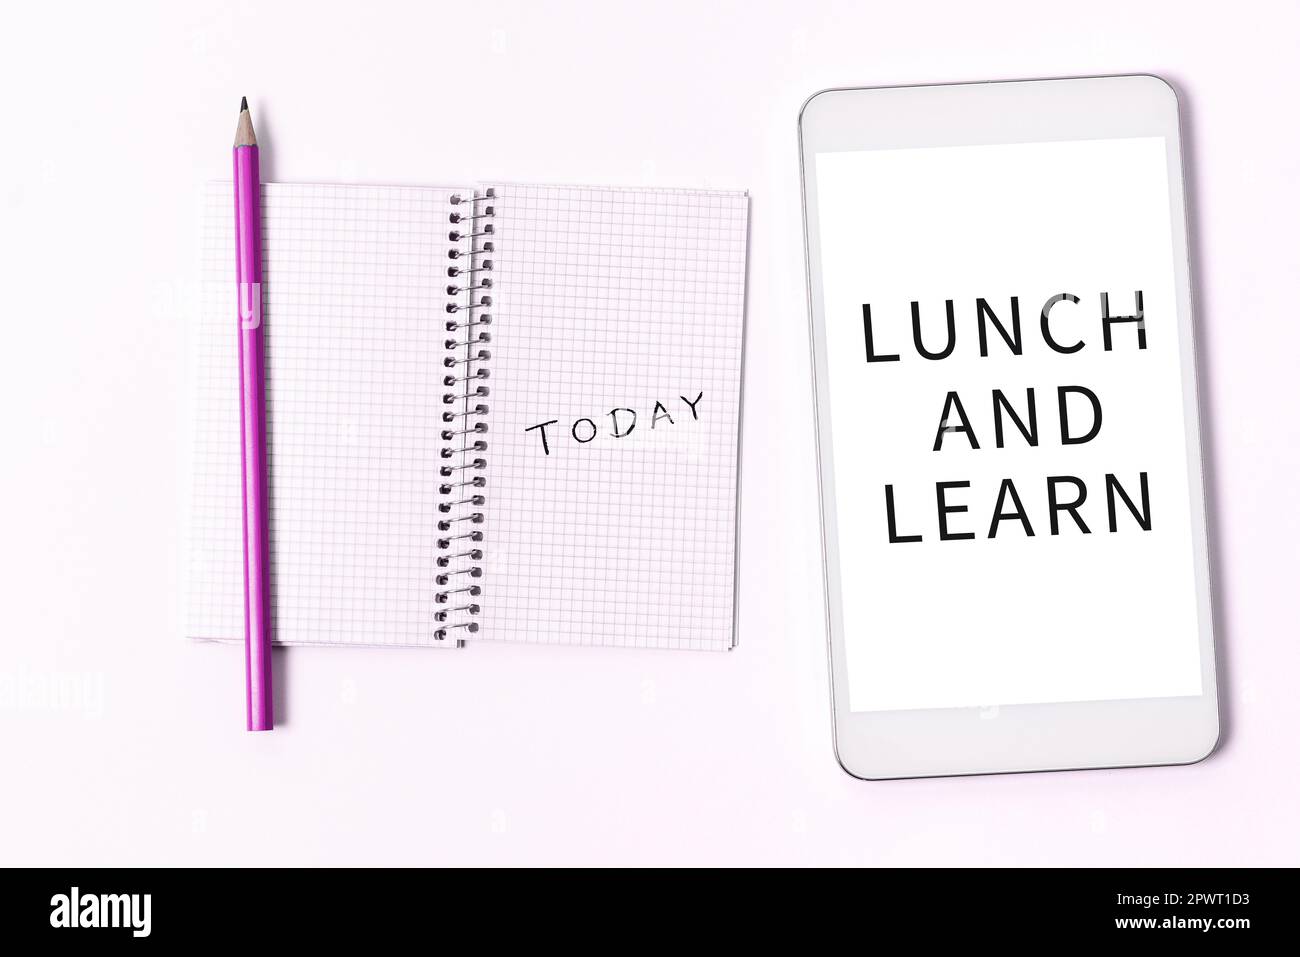 Schild, auf dem „Lunch and Learn“ (Mittagessen und Lernen), „Word Writed on Have Meal and Study Motivation for Education Learning Eating“ (das Wort auf „Essen“ Stockfoto